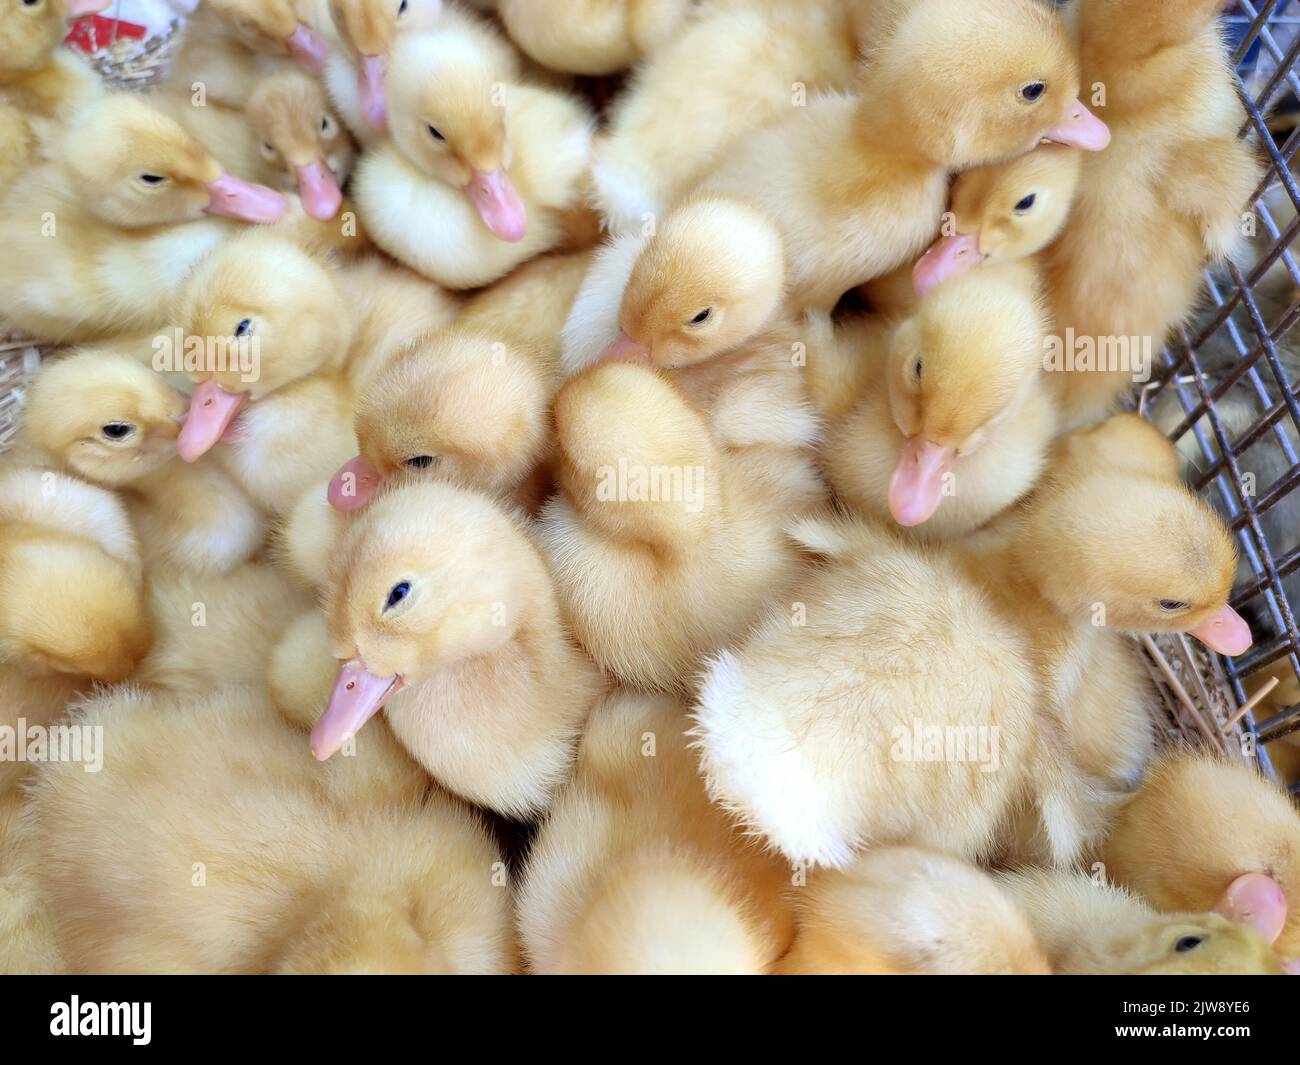 Many little yellow young ducks close-up. Many ducklings top view. Livestock, agribusiness, domestic pet, aviculture breeding, industrial production. Duck farm. Ducks breeding. Agricultural background Stock Photo